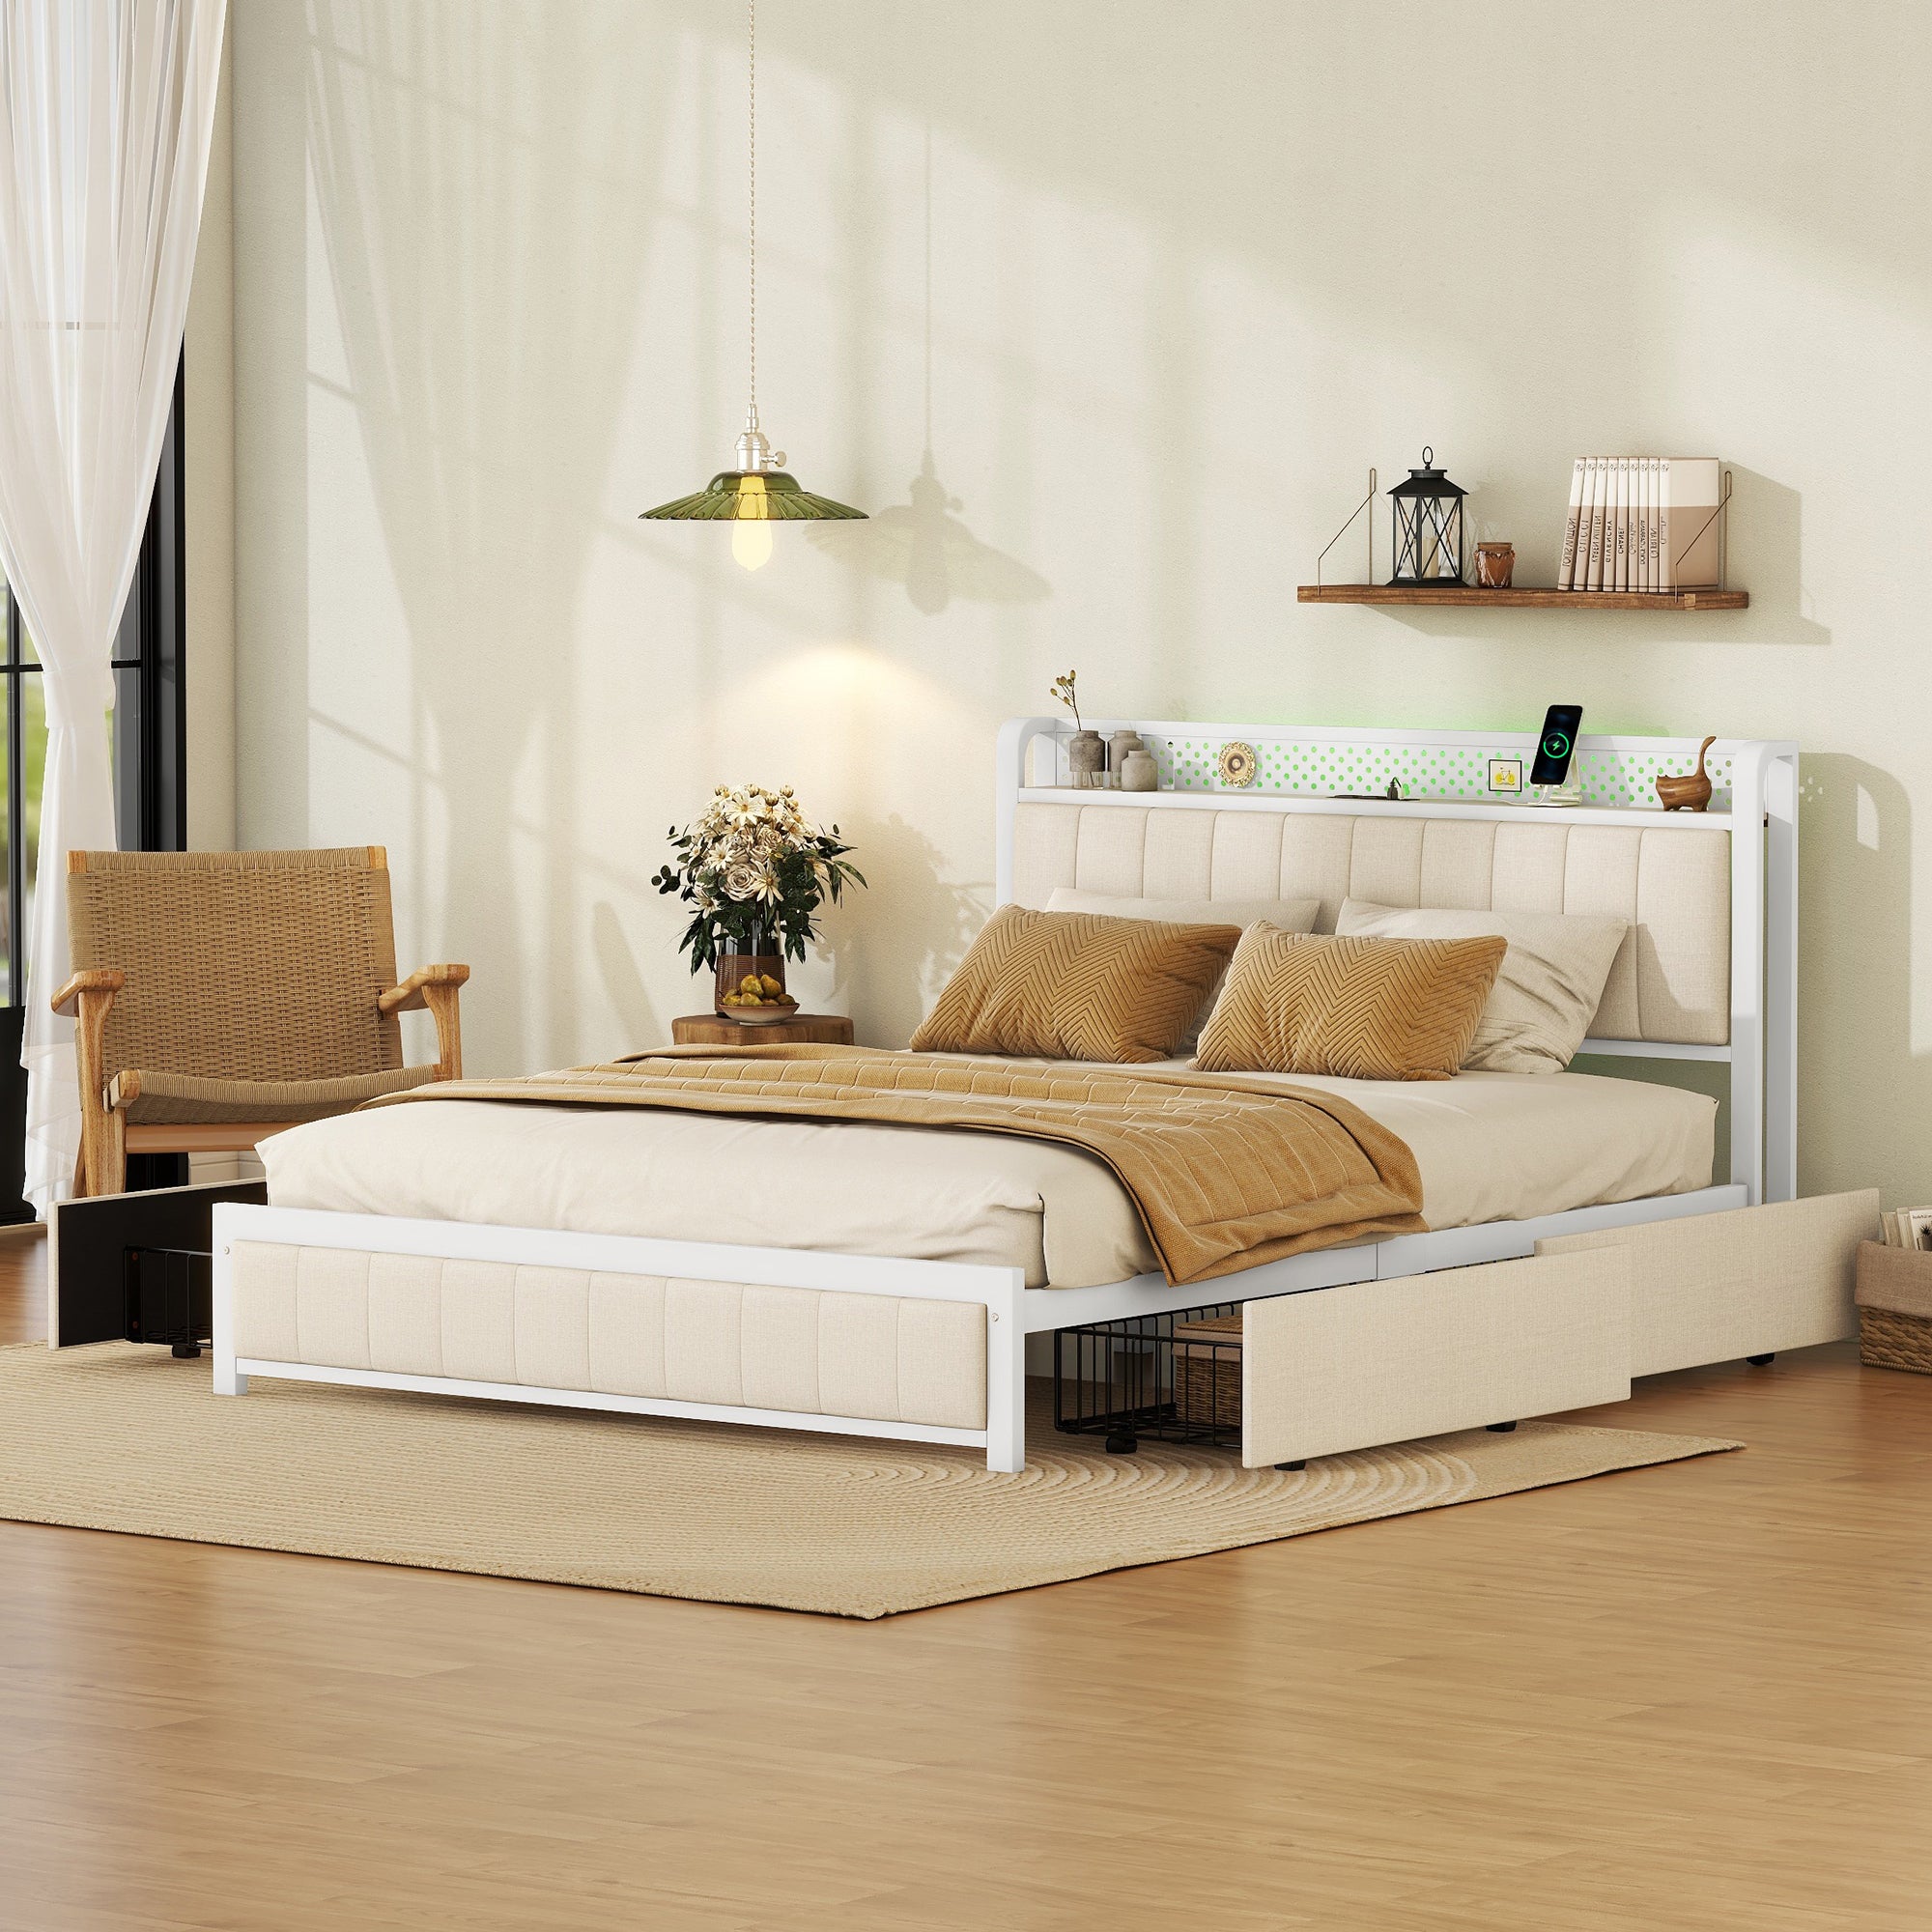 Bellemave Queen Size Upholstered Platform Bed with LED Headboard,4 Storage Drawers and USB Ports